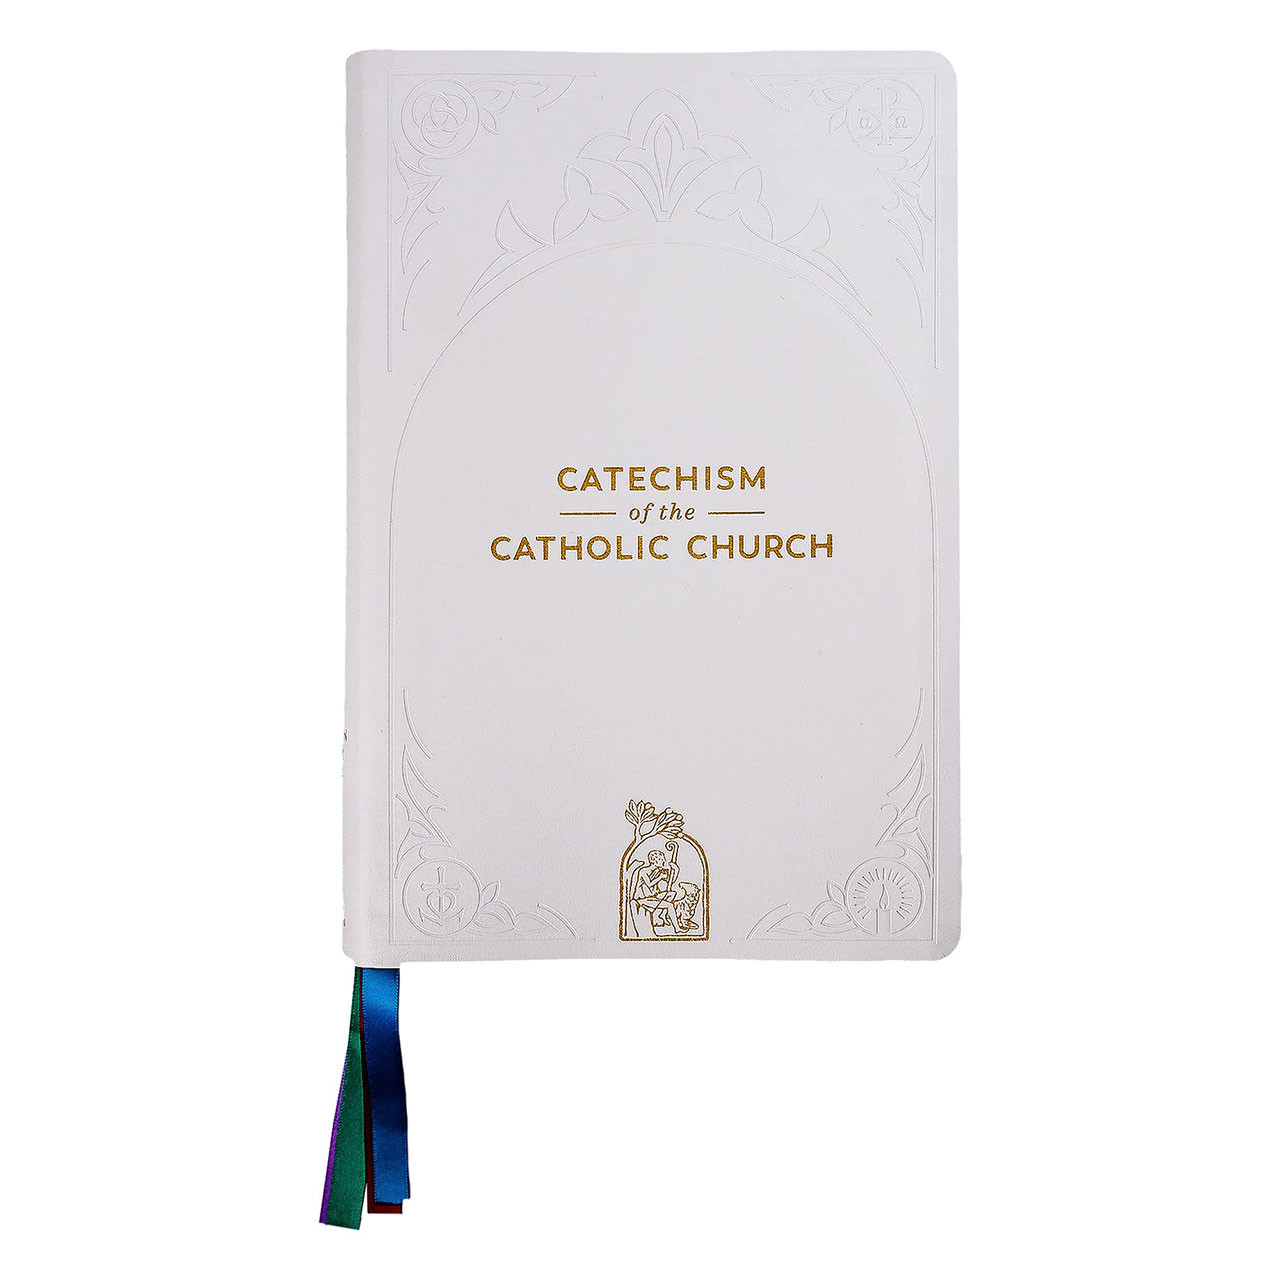 Catechism of the Catholic Church from Ascension Press